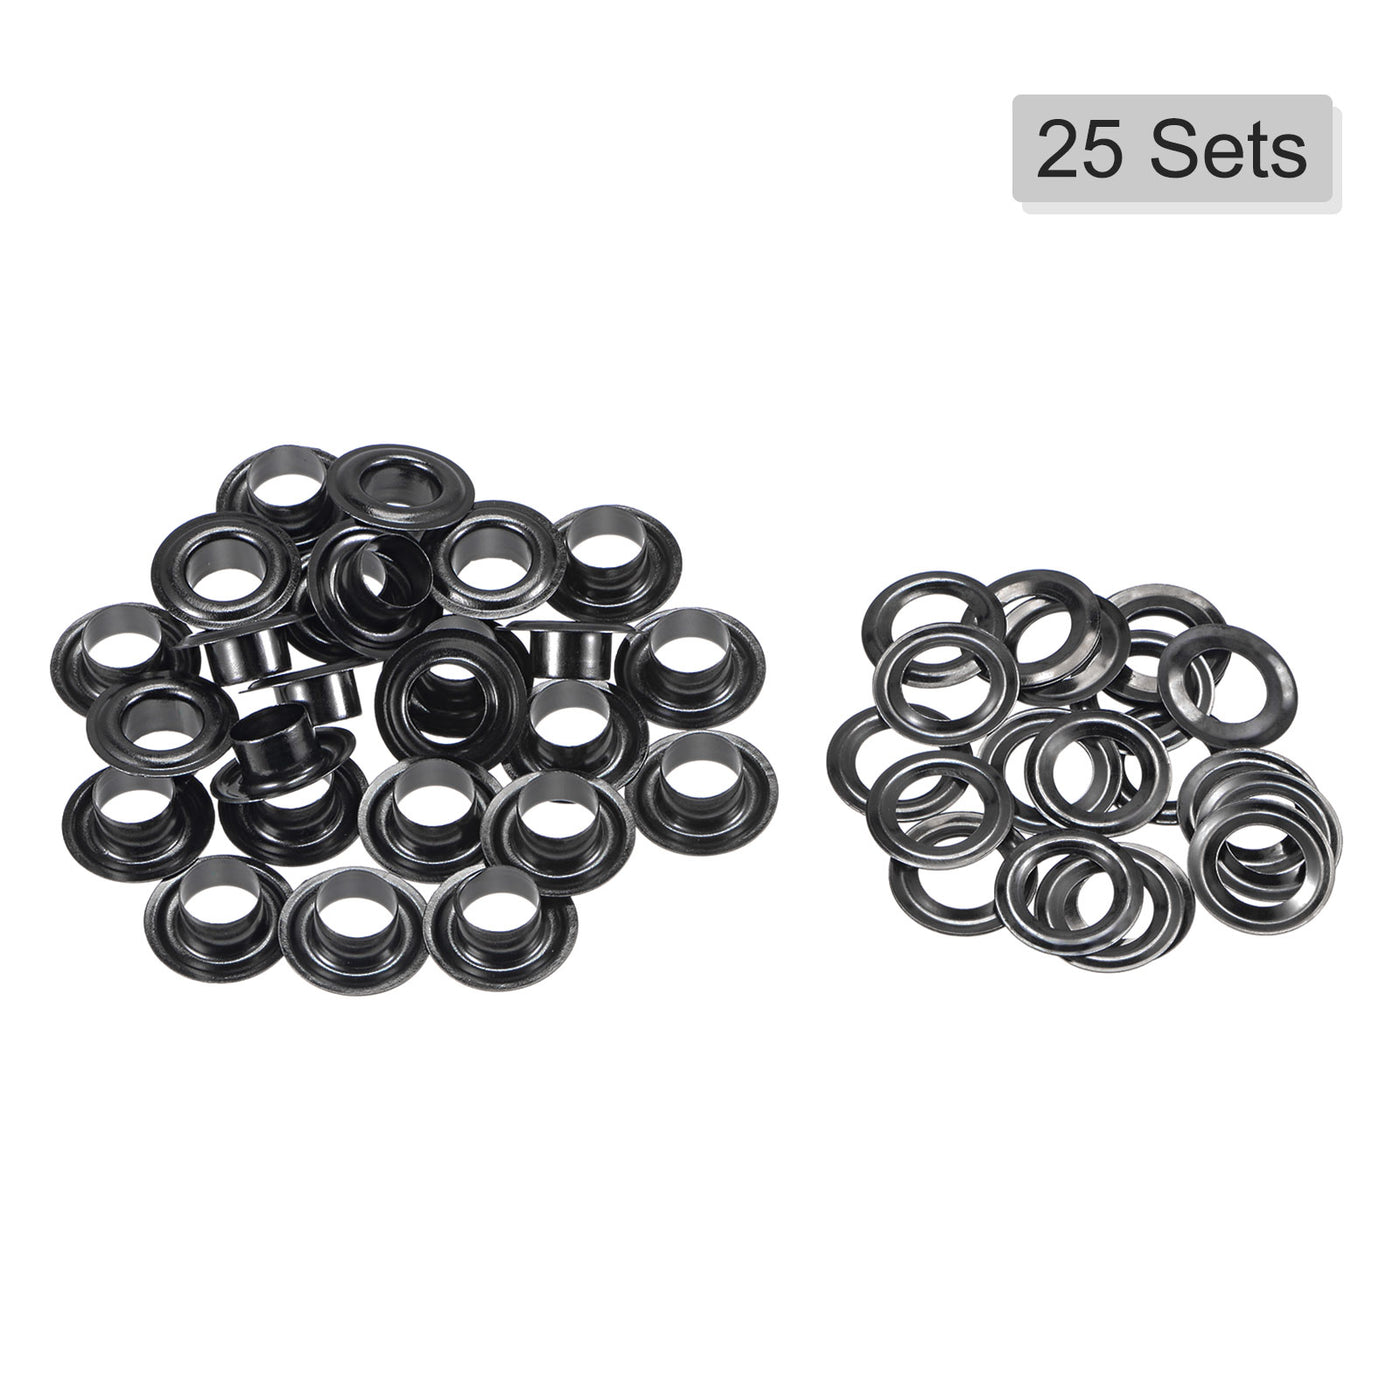 uxcell Uxcell 25Set 7.5mm Hole Copper Grommets Eyelets Black for Fabric Leather